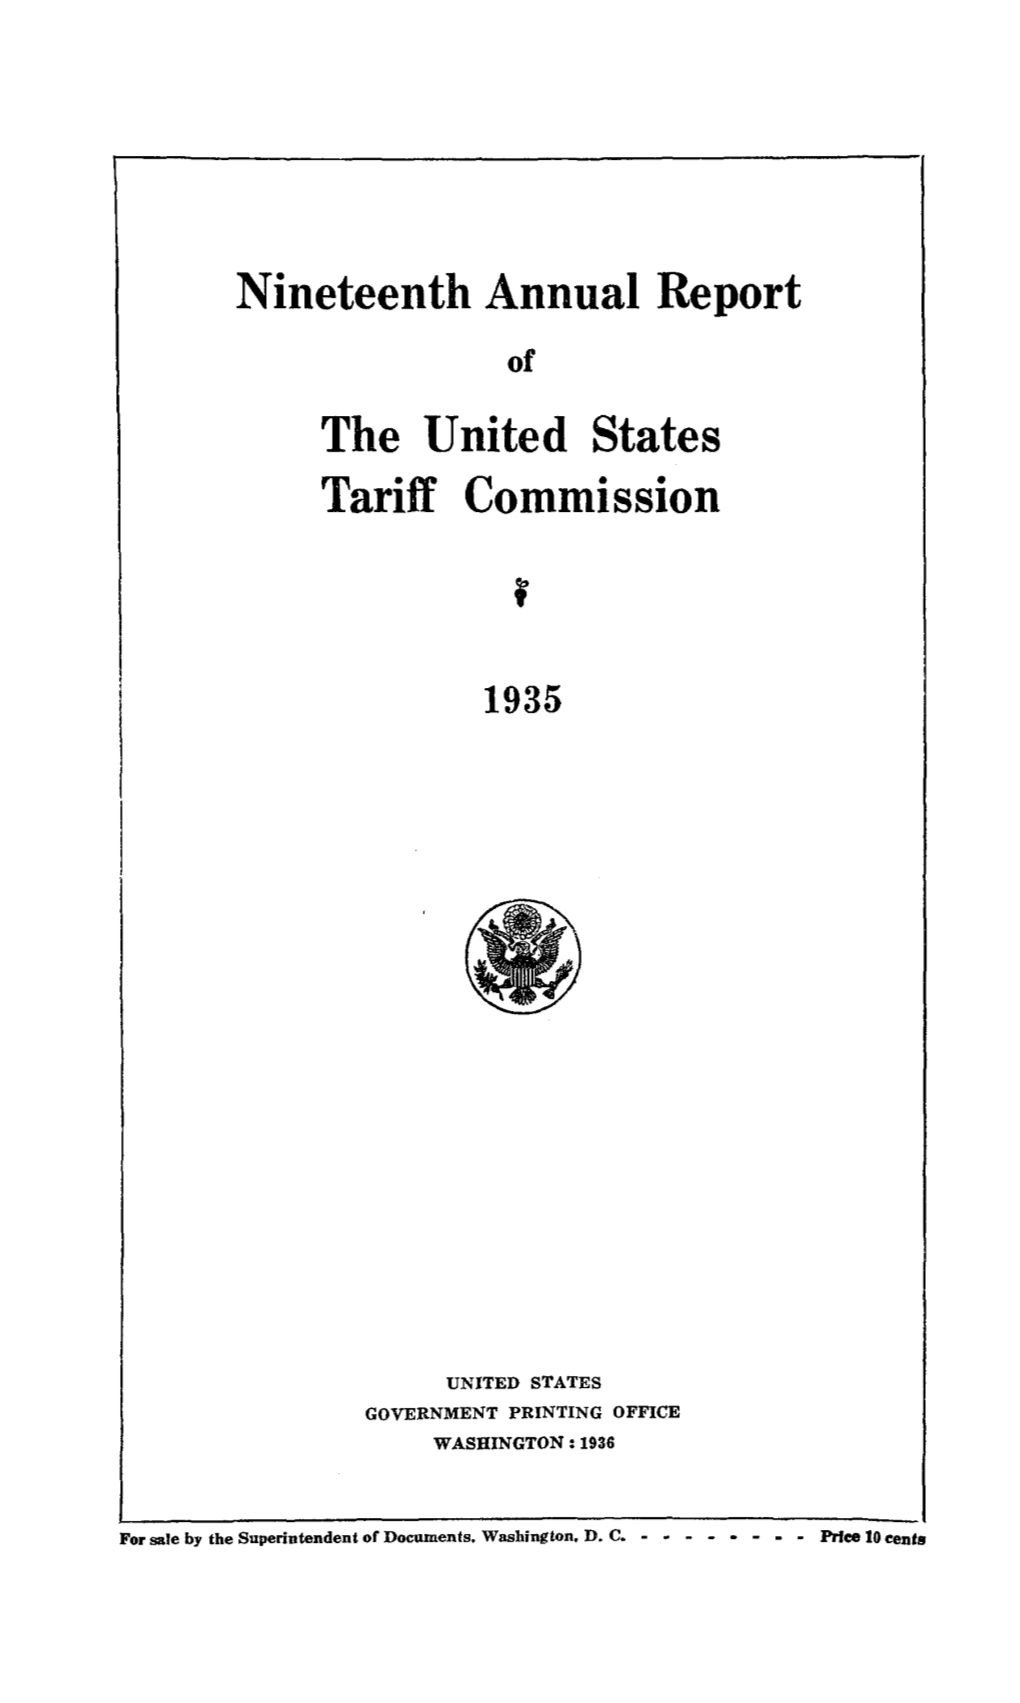 FY 1935 Annual Report